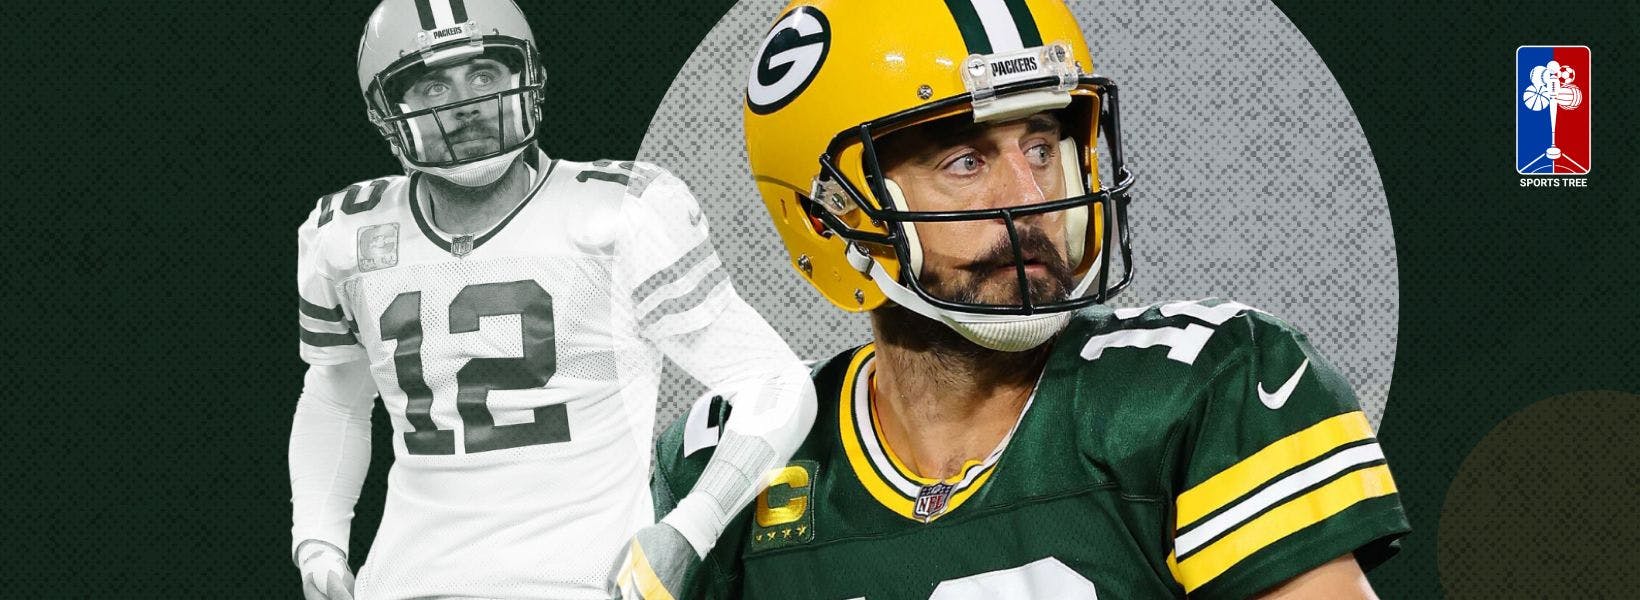 Green Bay Packers Aaron Rodgers wants to play for the Jets